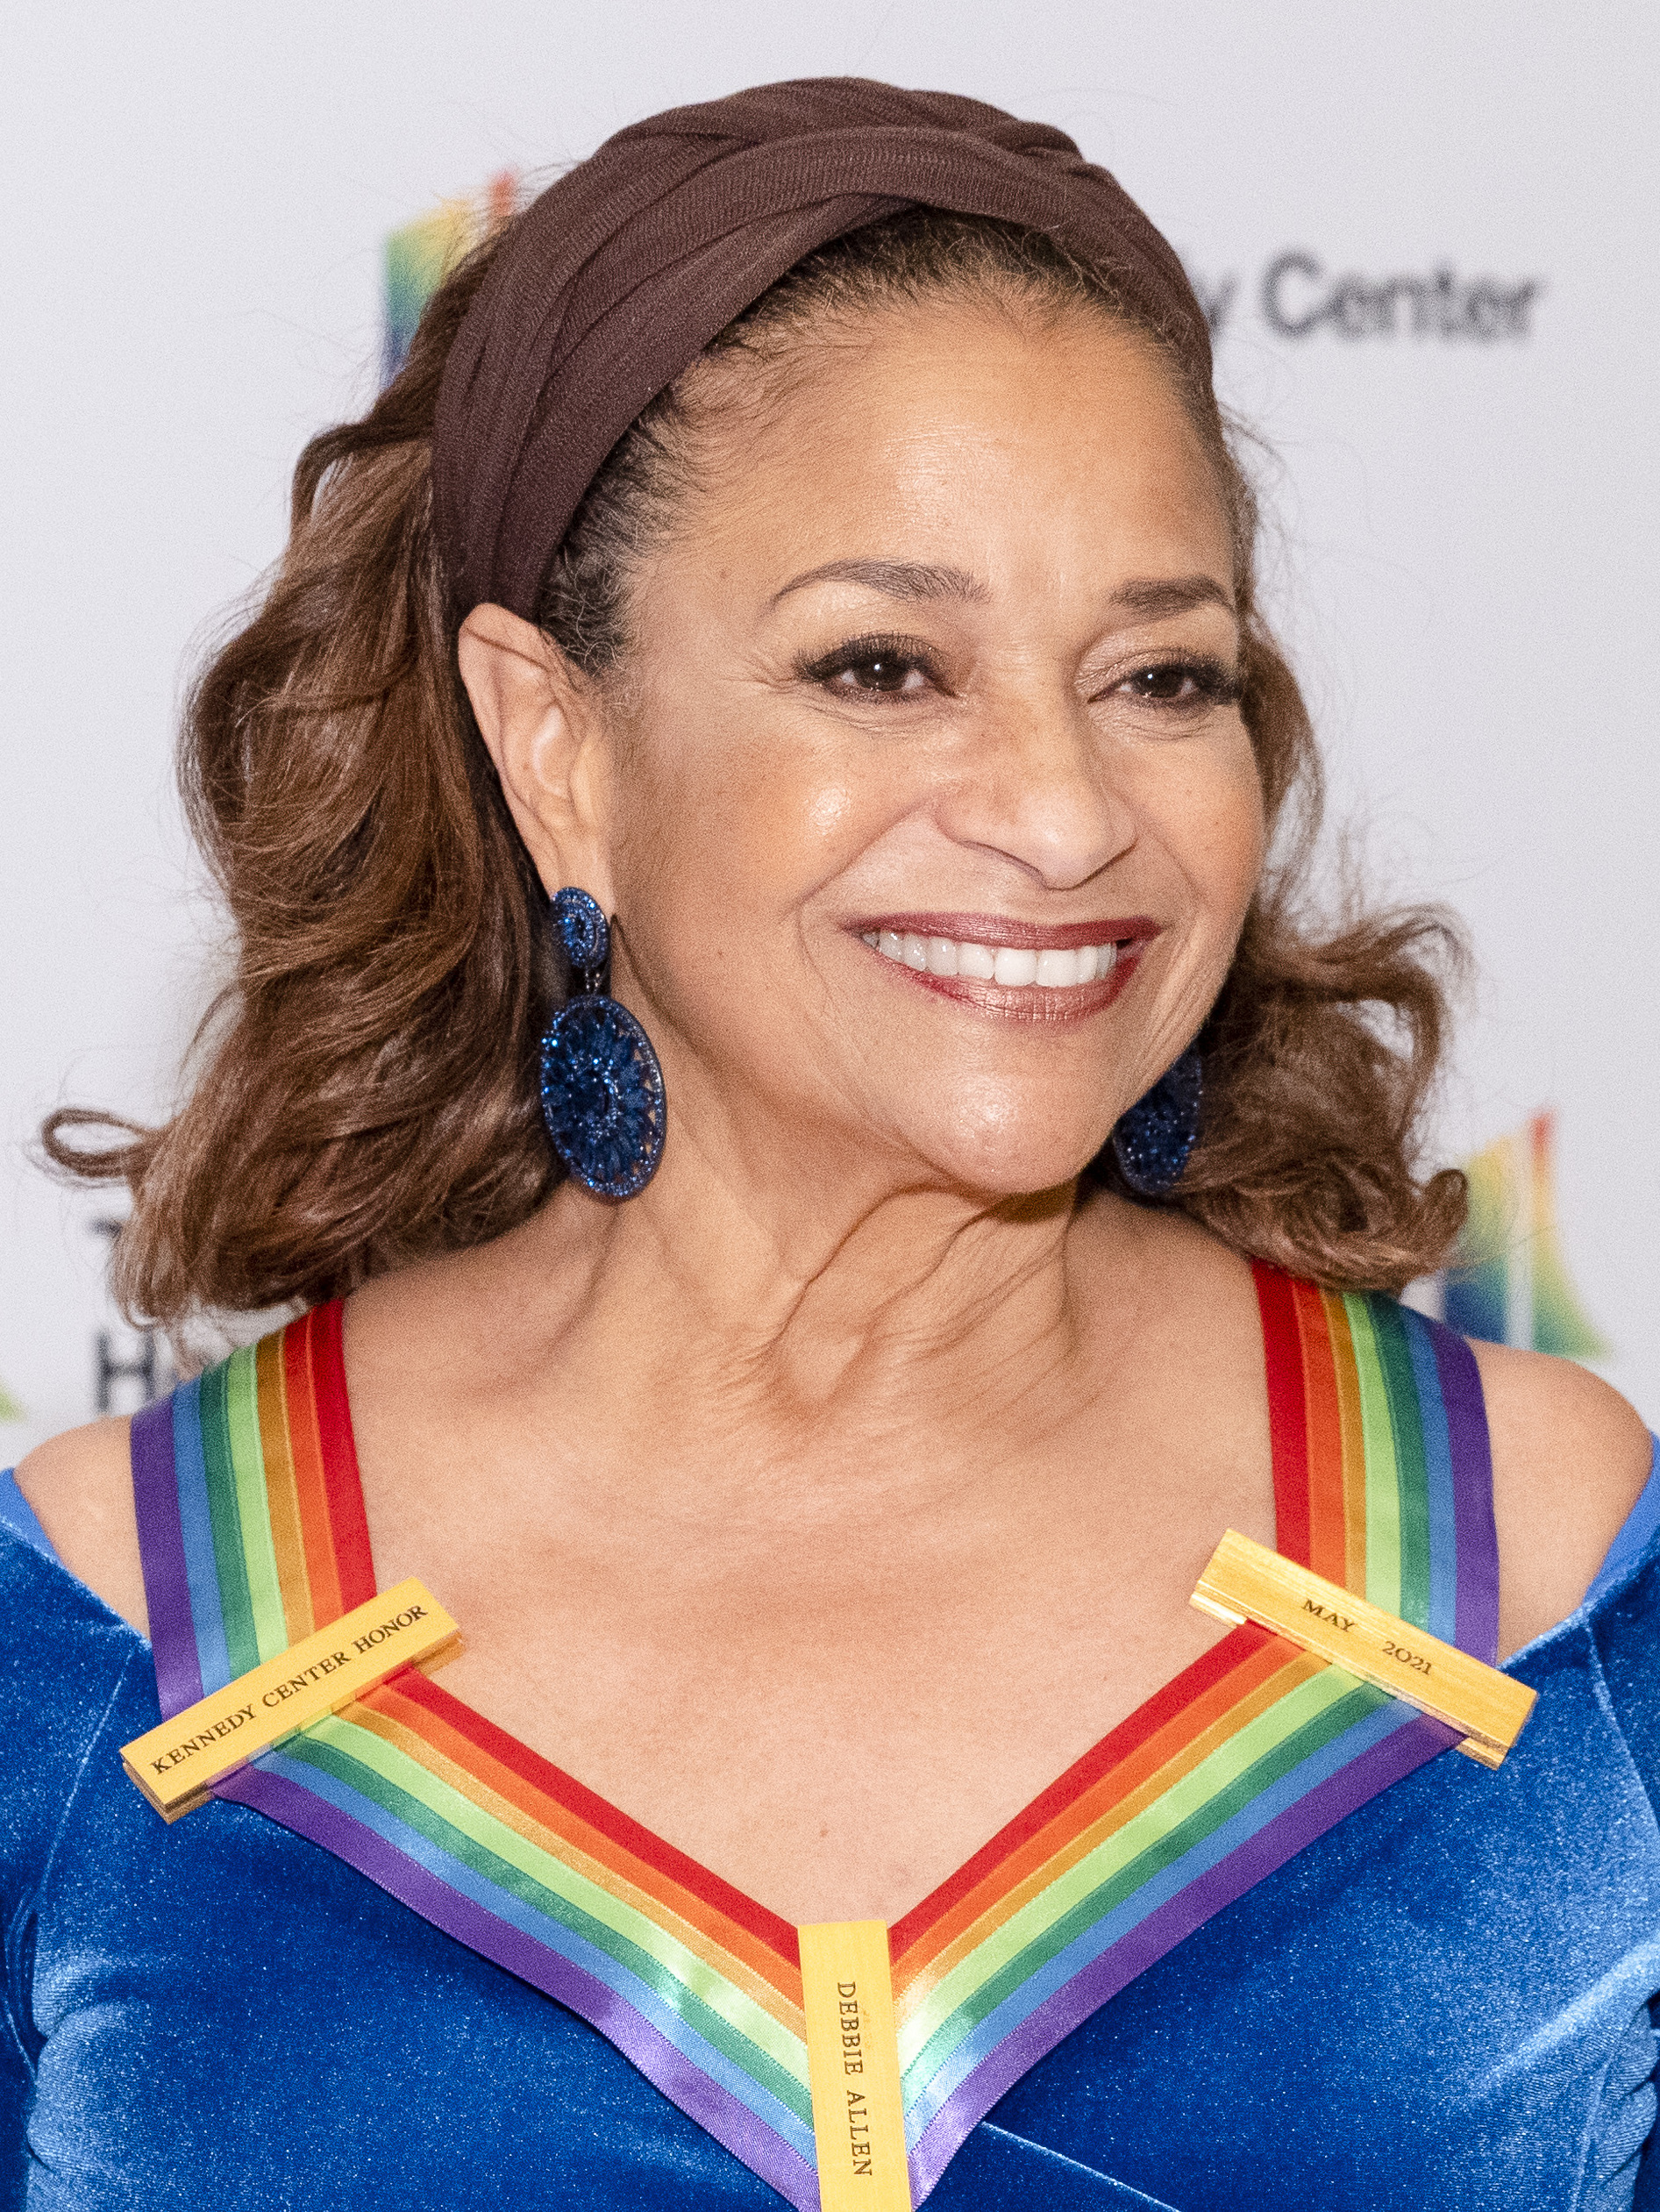 Debbie Allen, American actress, dancer, and choreographer was born on January 16, 1950.